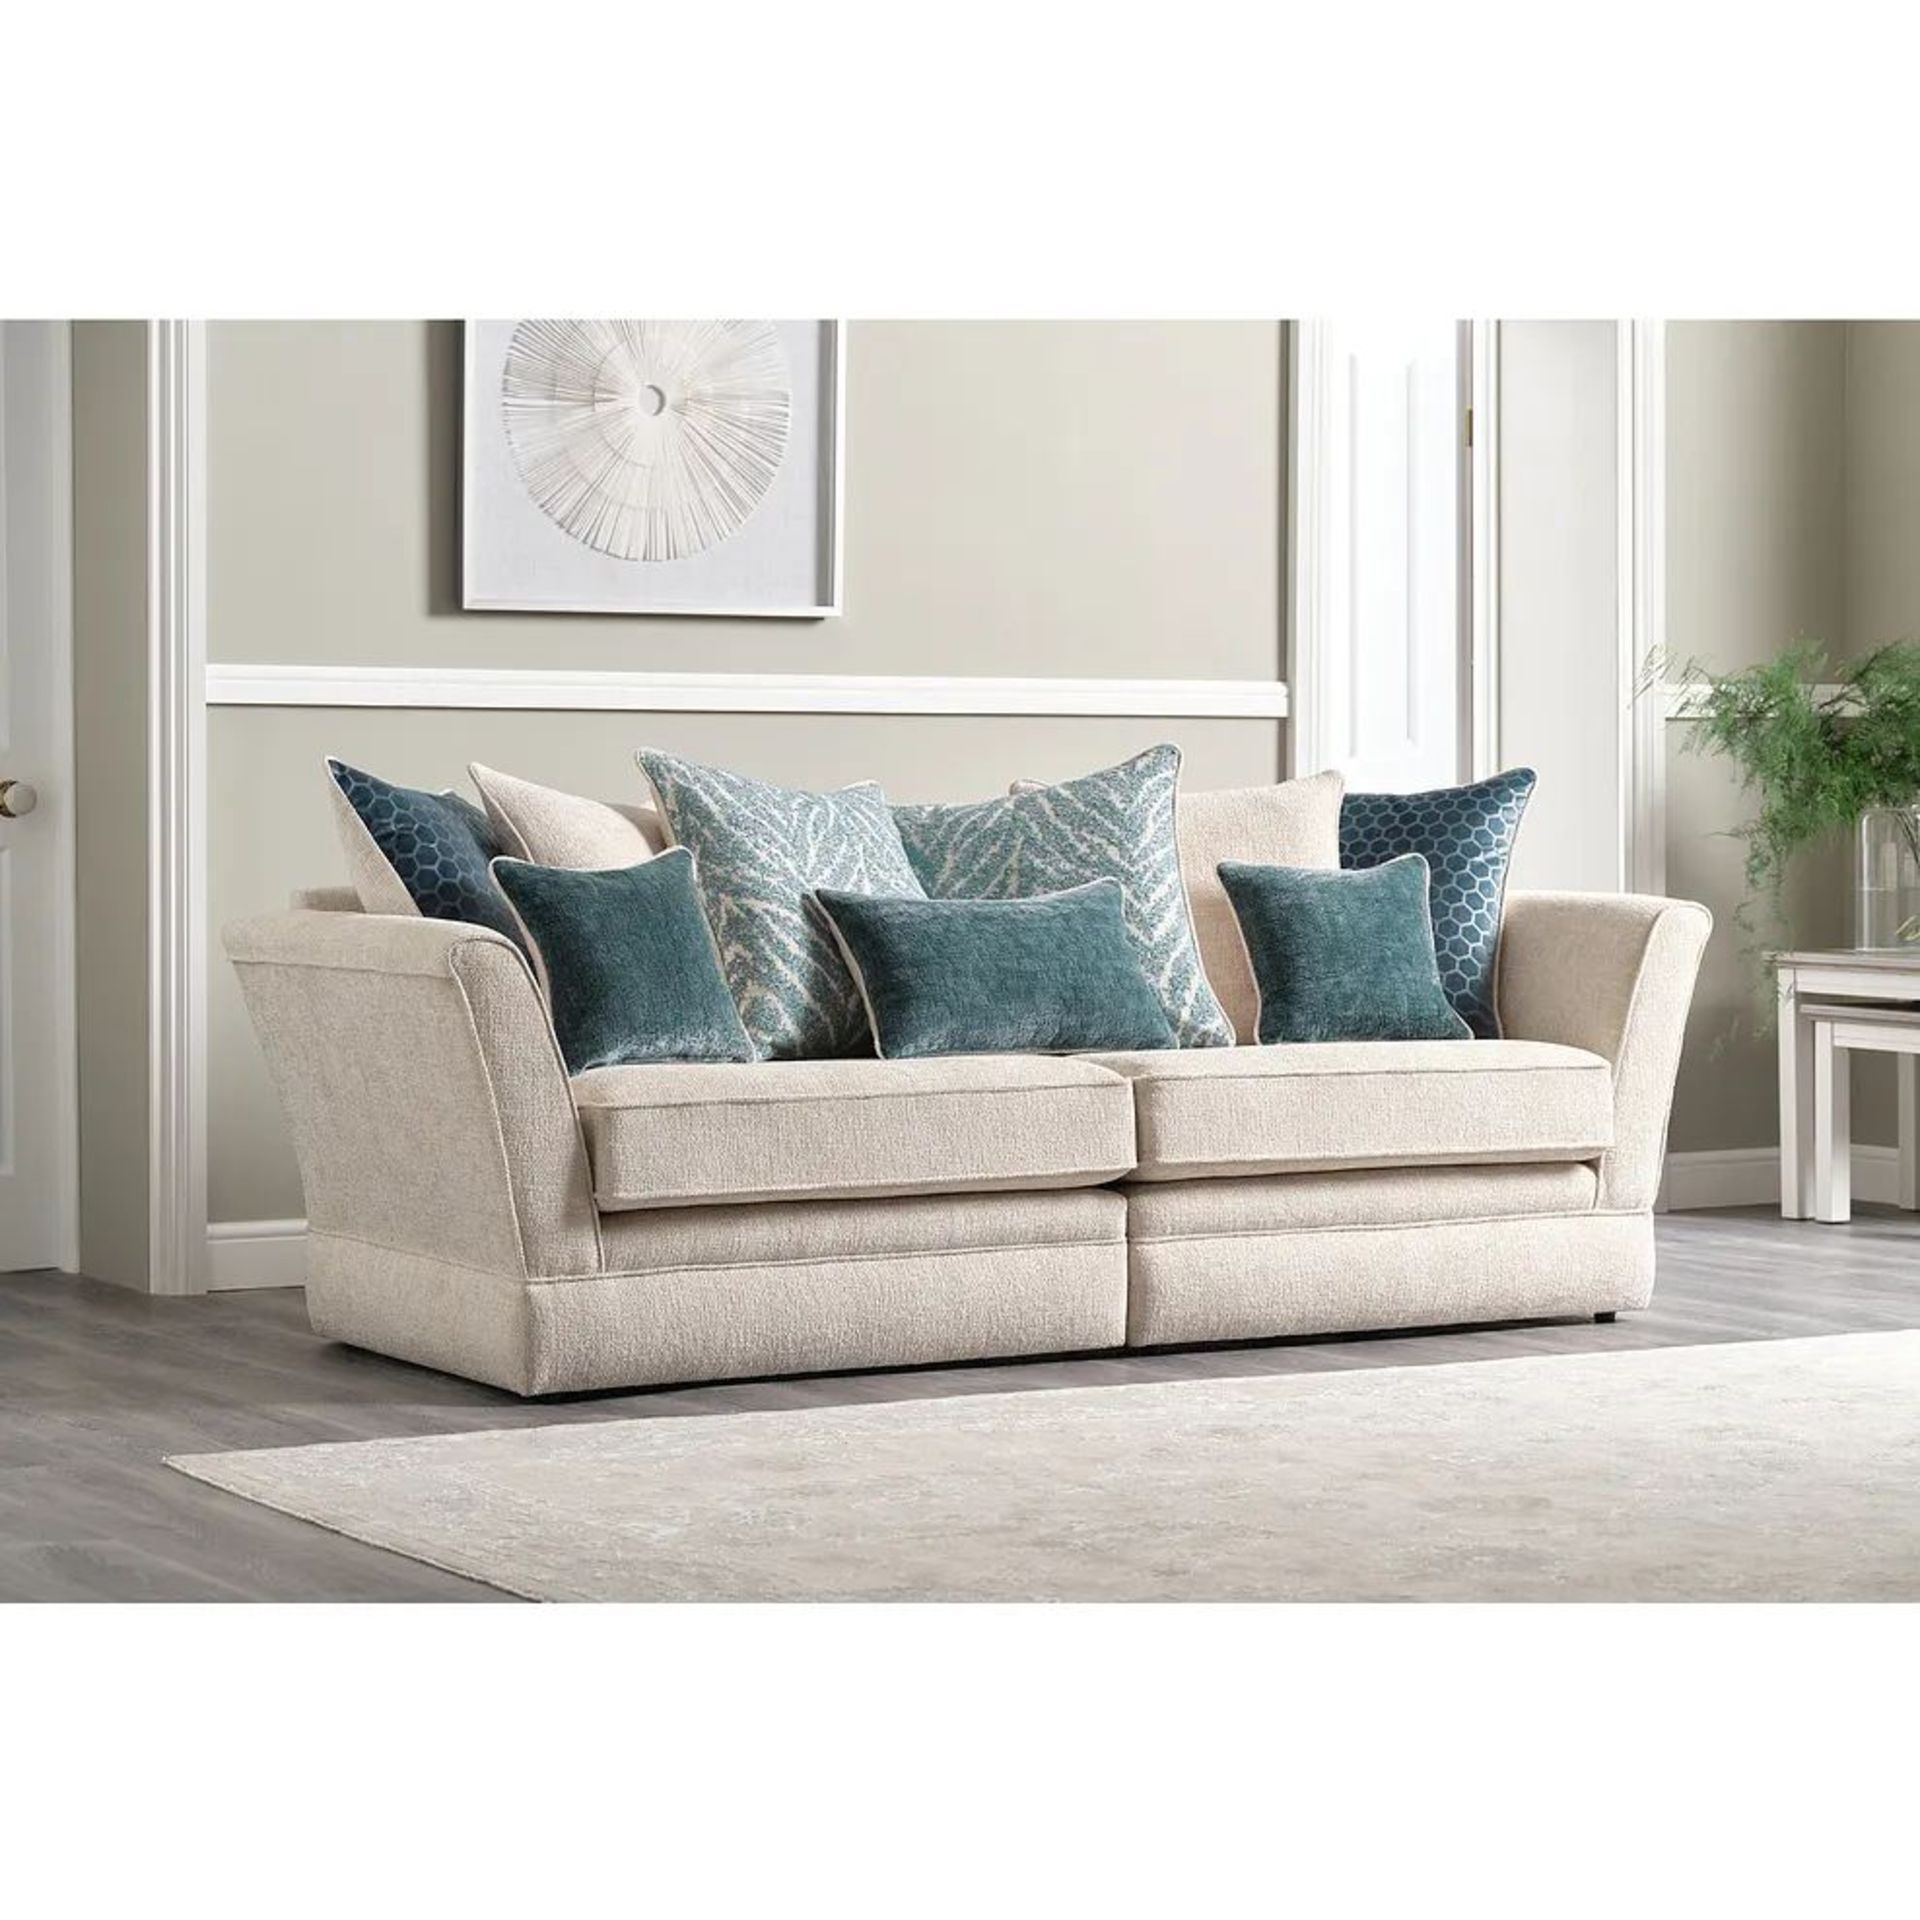 BRAND NEW CARRINGTON 4 Seater Pillow Back Split Sofa - NATURAL FABRIC. RRP £1149. Bring a modern - Image 8 of 8